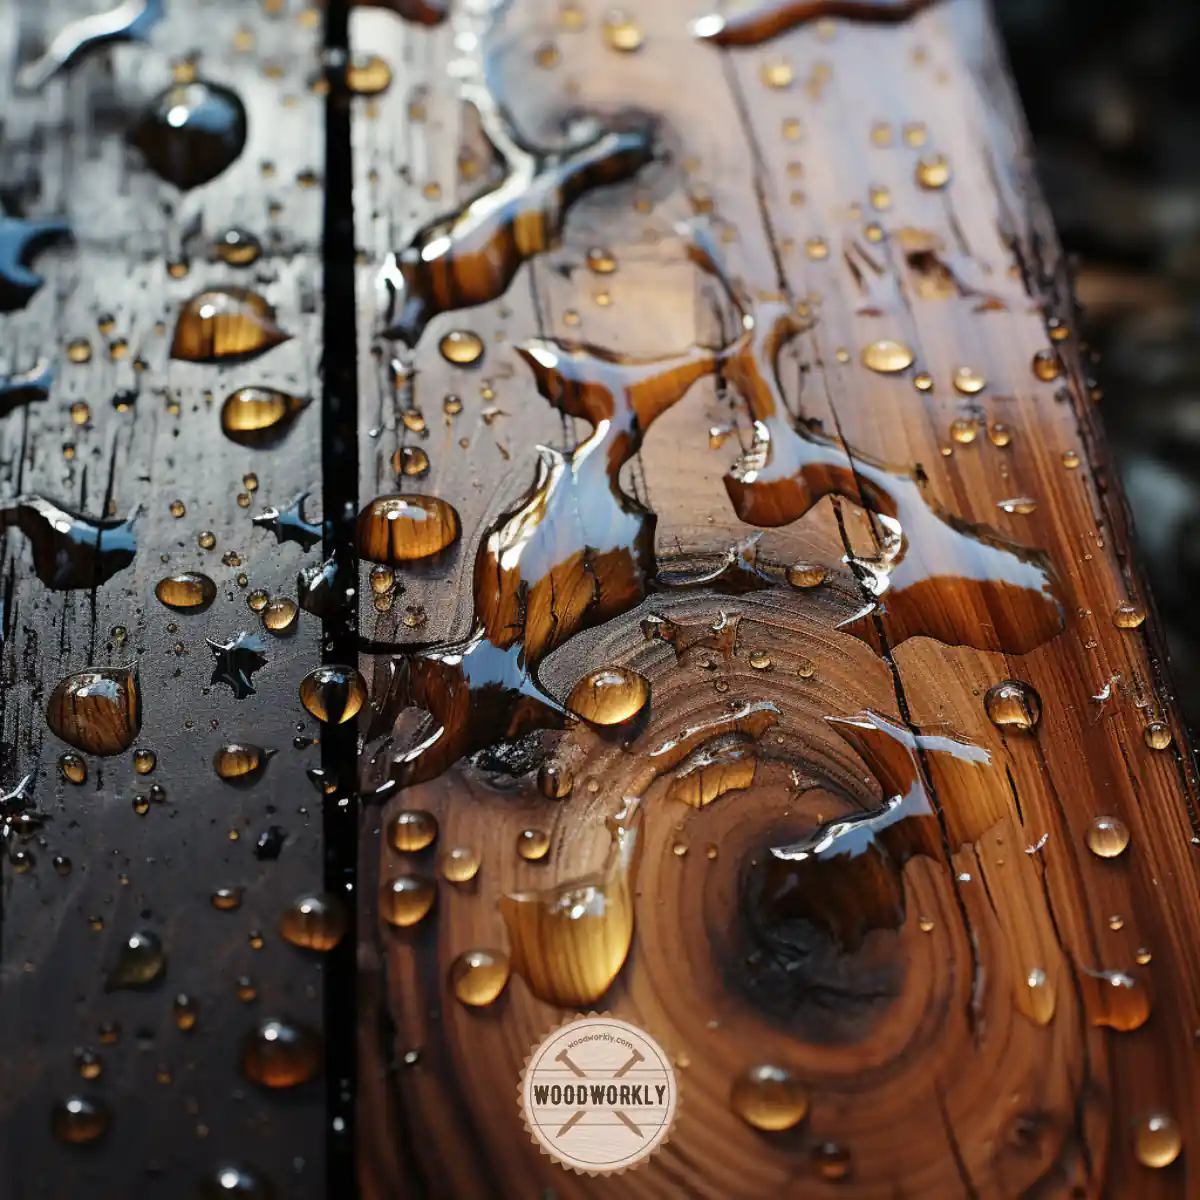 Wet wood surface